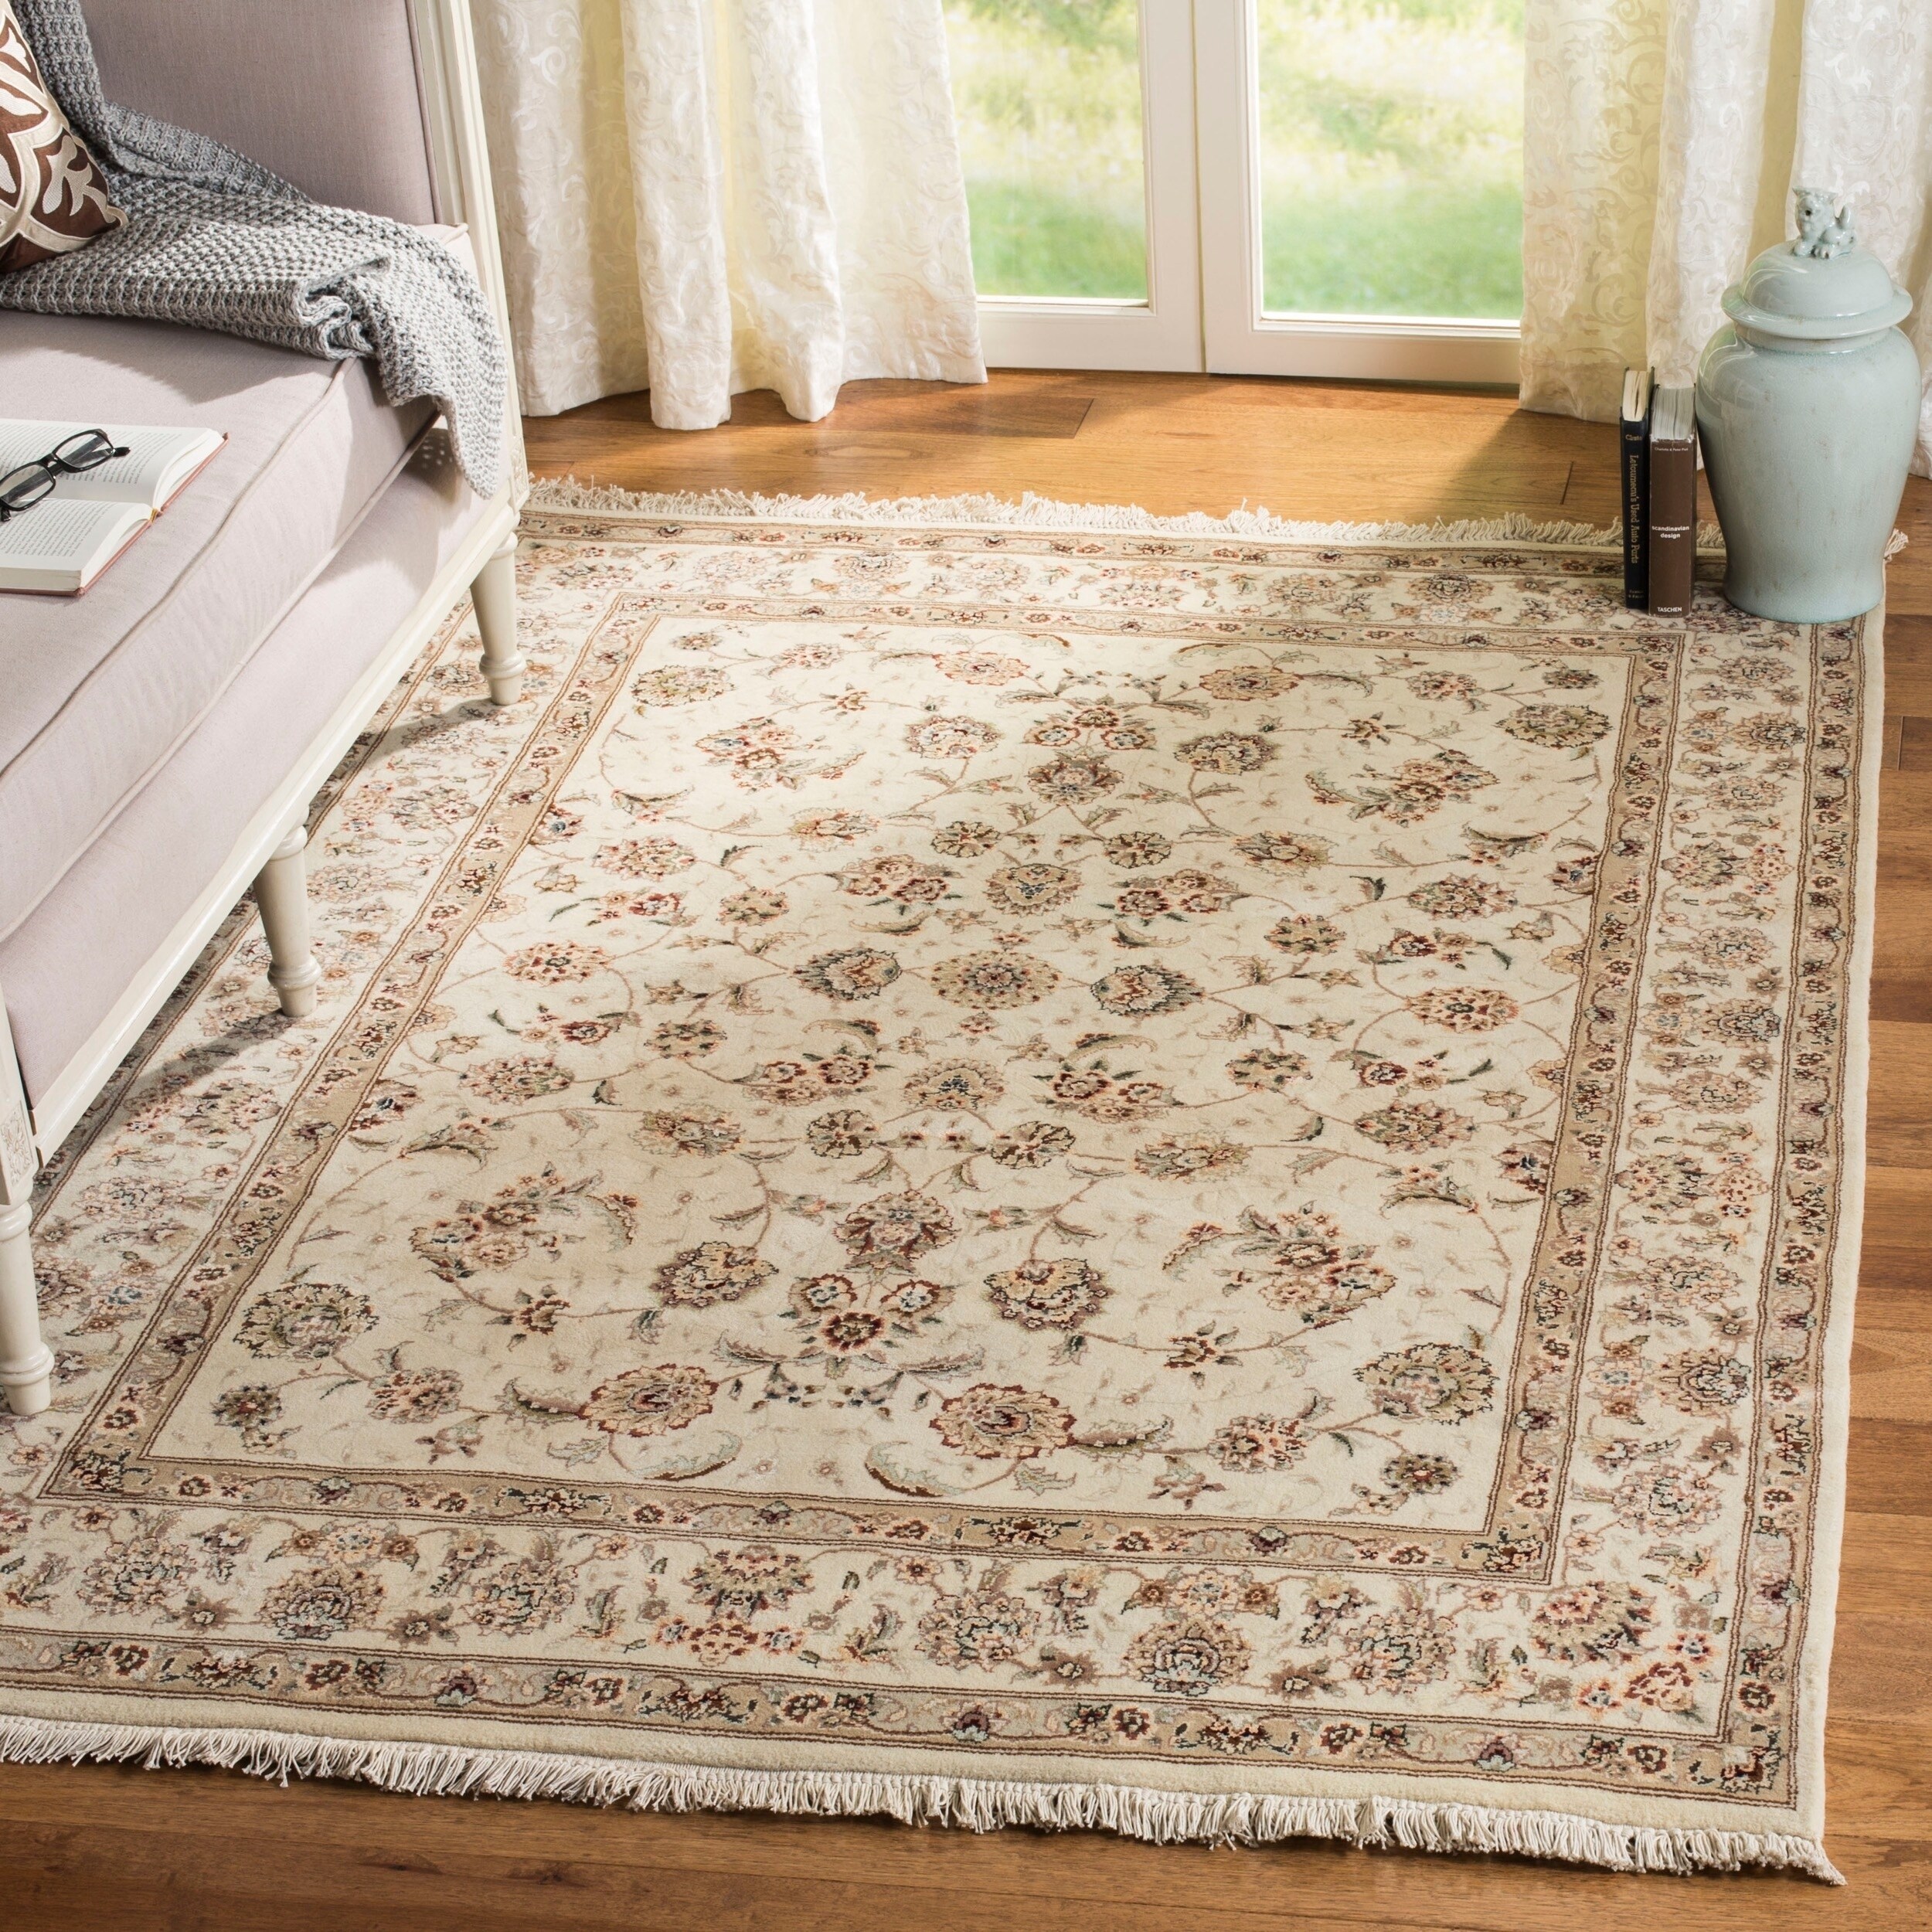 Safavieh Hand knotted Tabriz Floral Ivory/ Ivory Wool/ Silk Rug (5 X 7)